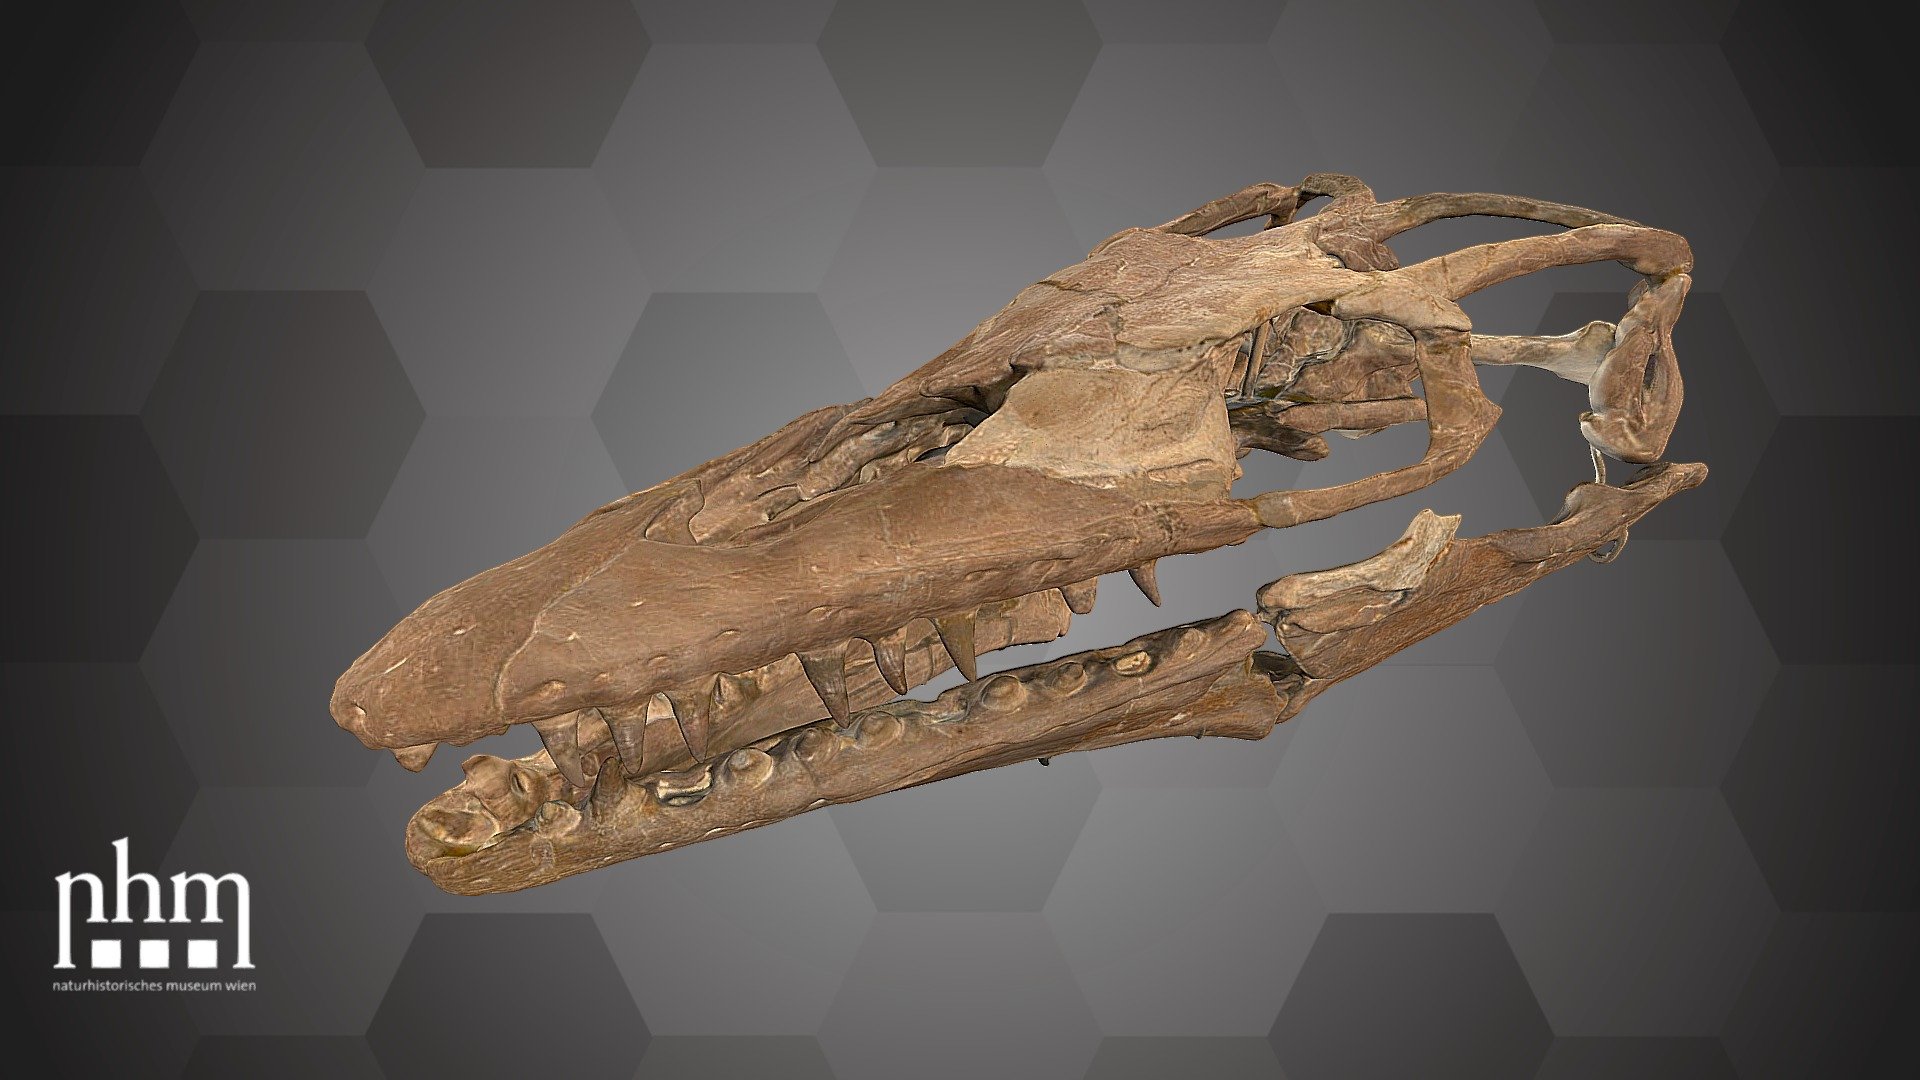 3D scan of a skull and mandible of the mosasaurid Platecarpus coryphaeus. He was an aquatic predator during the late Cretaceous, living about 81–85 million years ago. Mosasaurids are members of the order Squamata and are therefore relatives of lizards and snakes. Fossils of Platecarpus are found predominantly in North America, but were perhaps also occurring in Europe, Africa &amp; New Zealand.

This skull of Platecarpus coryphaeus  will be on display in the upcoming exhibition &ldquo;CineSaurs